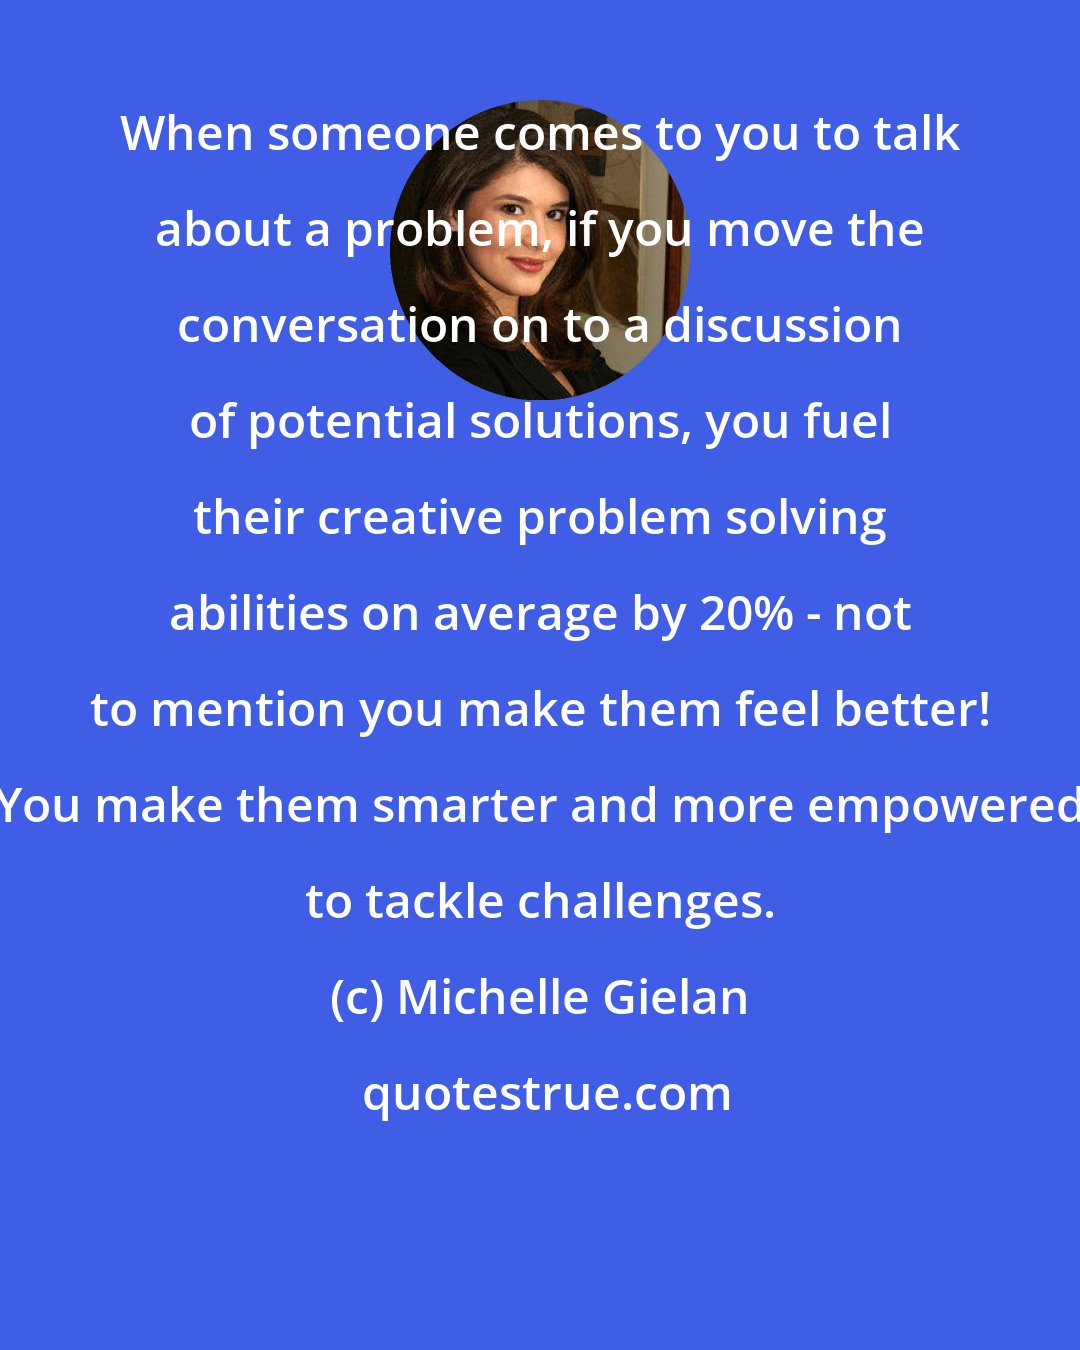 Michelle Gielan: When someone comes to you to talk about a problem, if you move the conversation on to a discussion of potential solutions, you fuel their creative problem solving abilities on average by 20% - not to mention you make them feel better! You make them smarter and more empowered to tackle challenges.